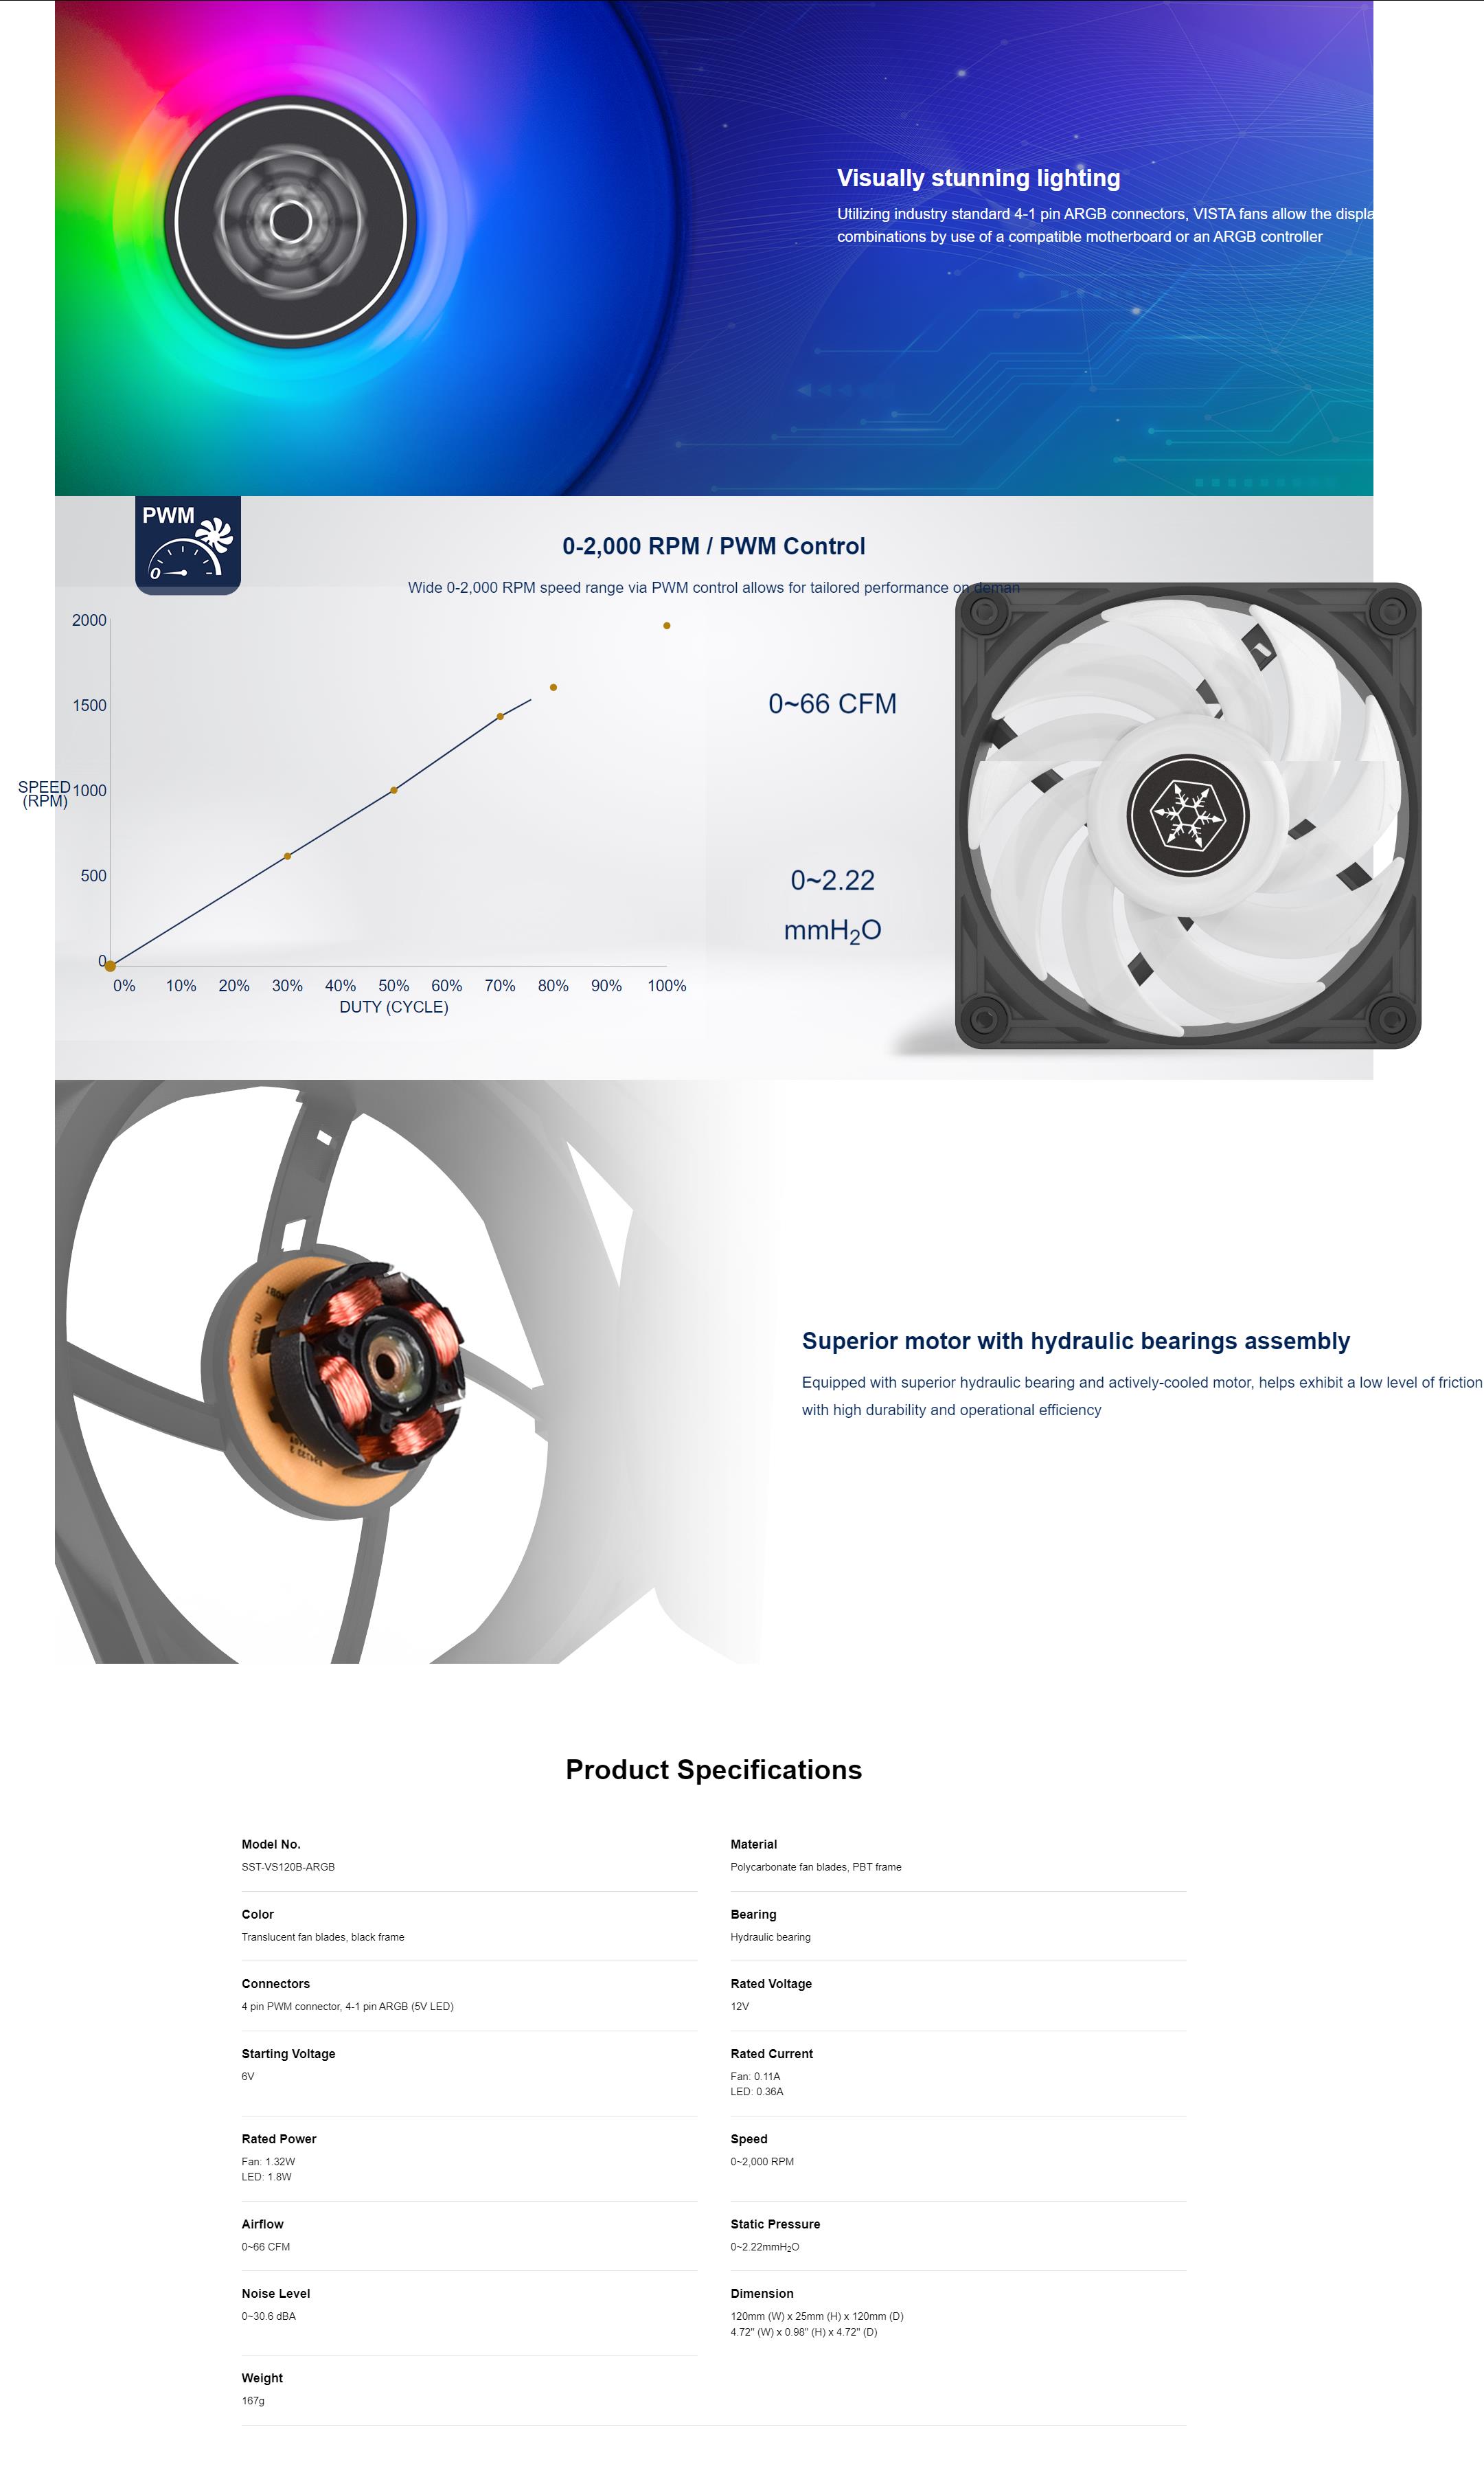 A large marketing image providing additional information about the product SilverStone VISTA 120 ARGB 120mm PWM Cooling Fan - Additional alt info not provided